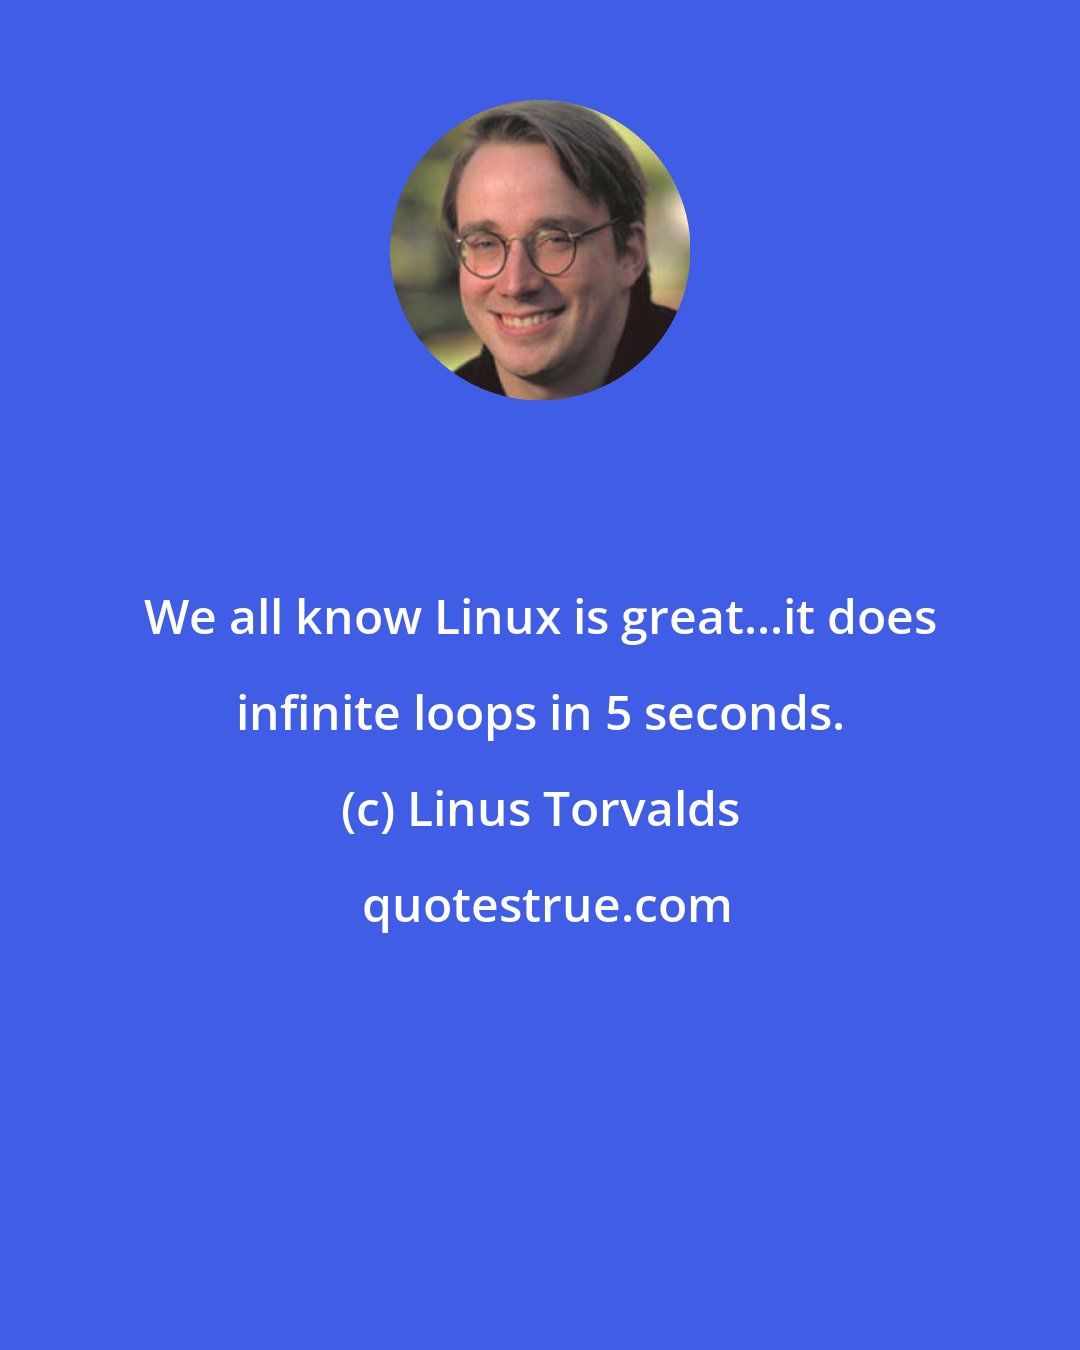 Linus Torvalds: We all know Linux is great...it does infinite loops in 5 seconds.